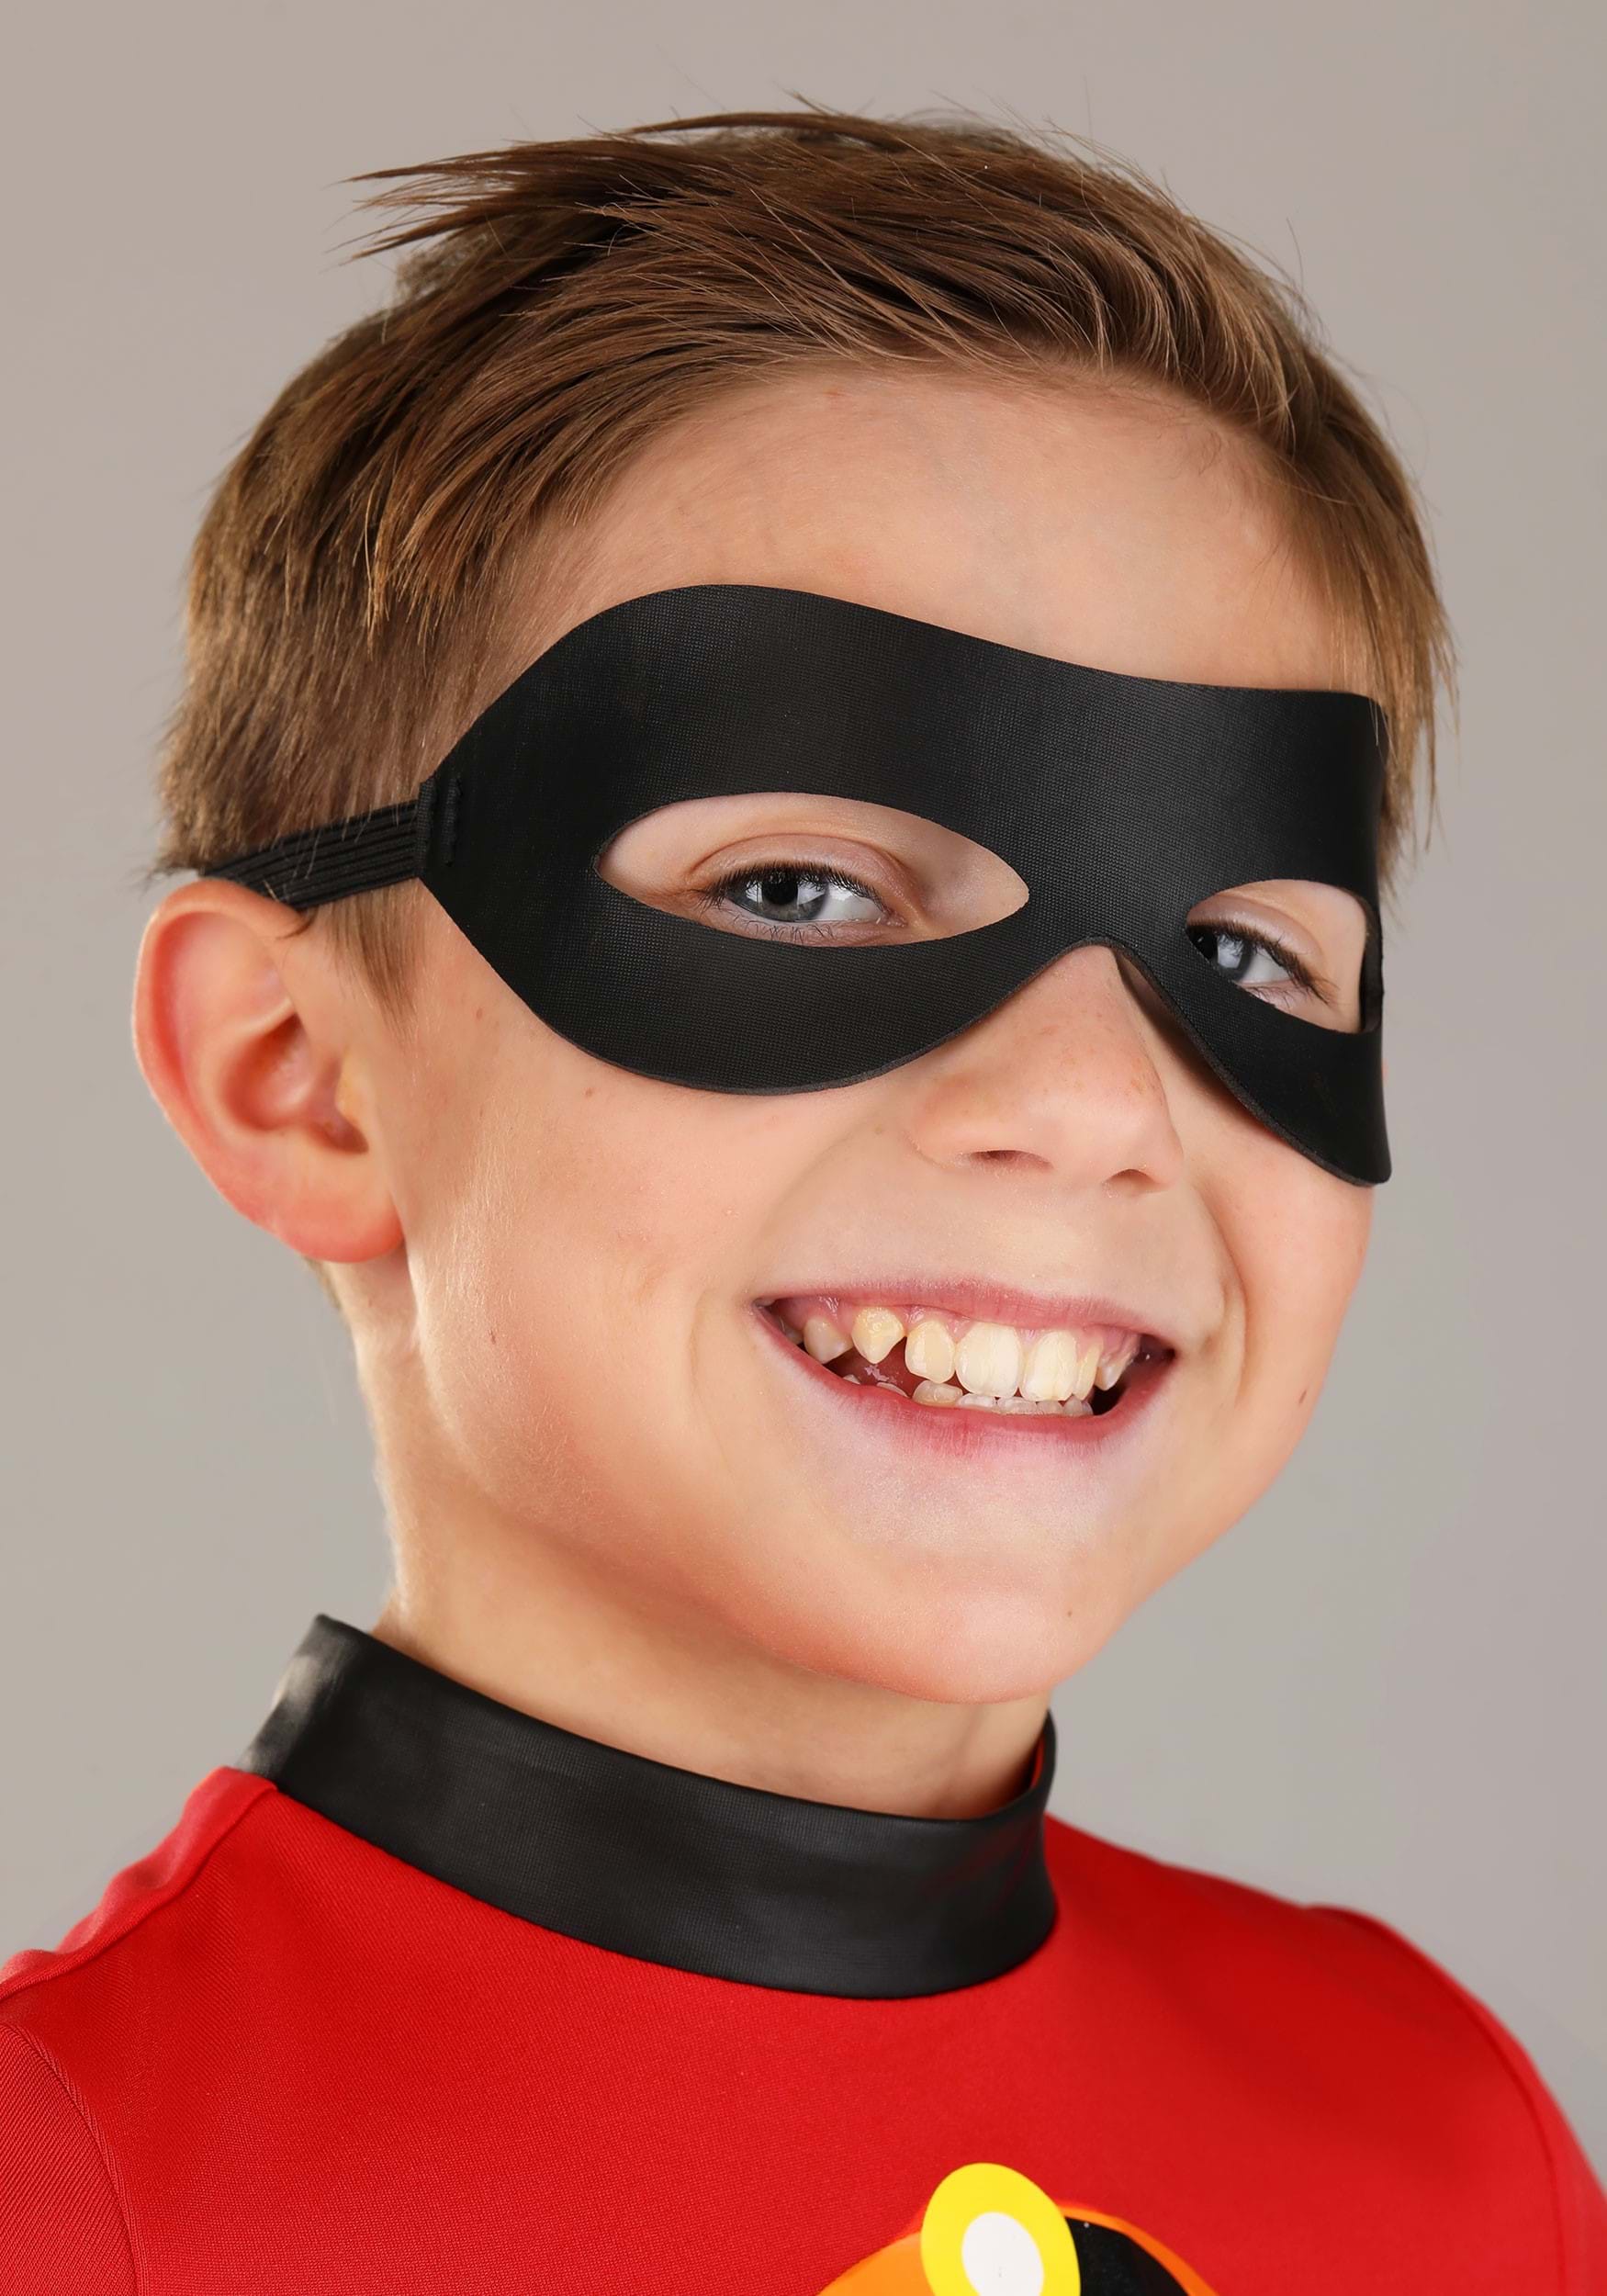 The Incredibles Dash Costume for Toddlers